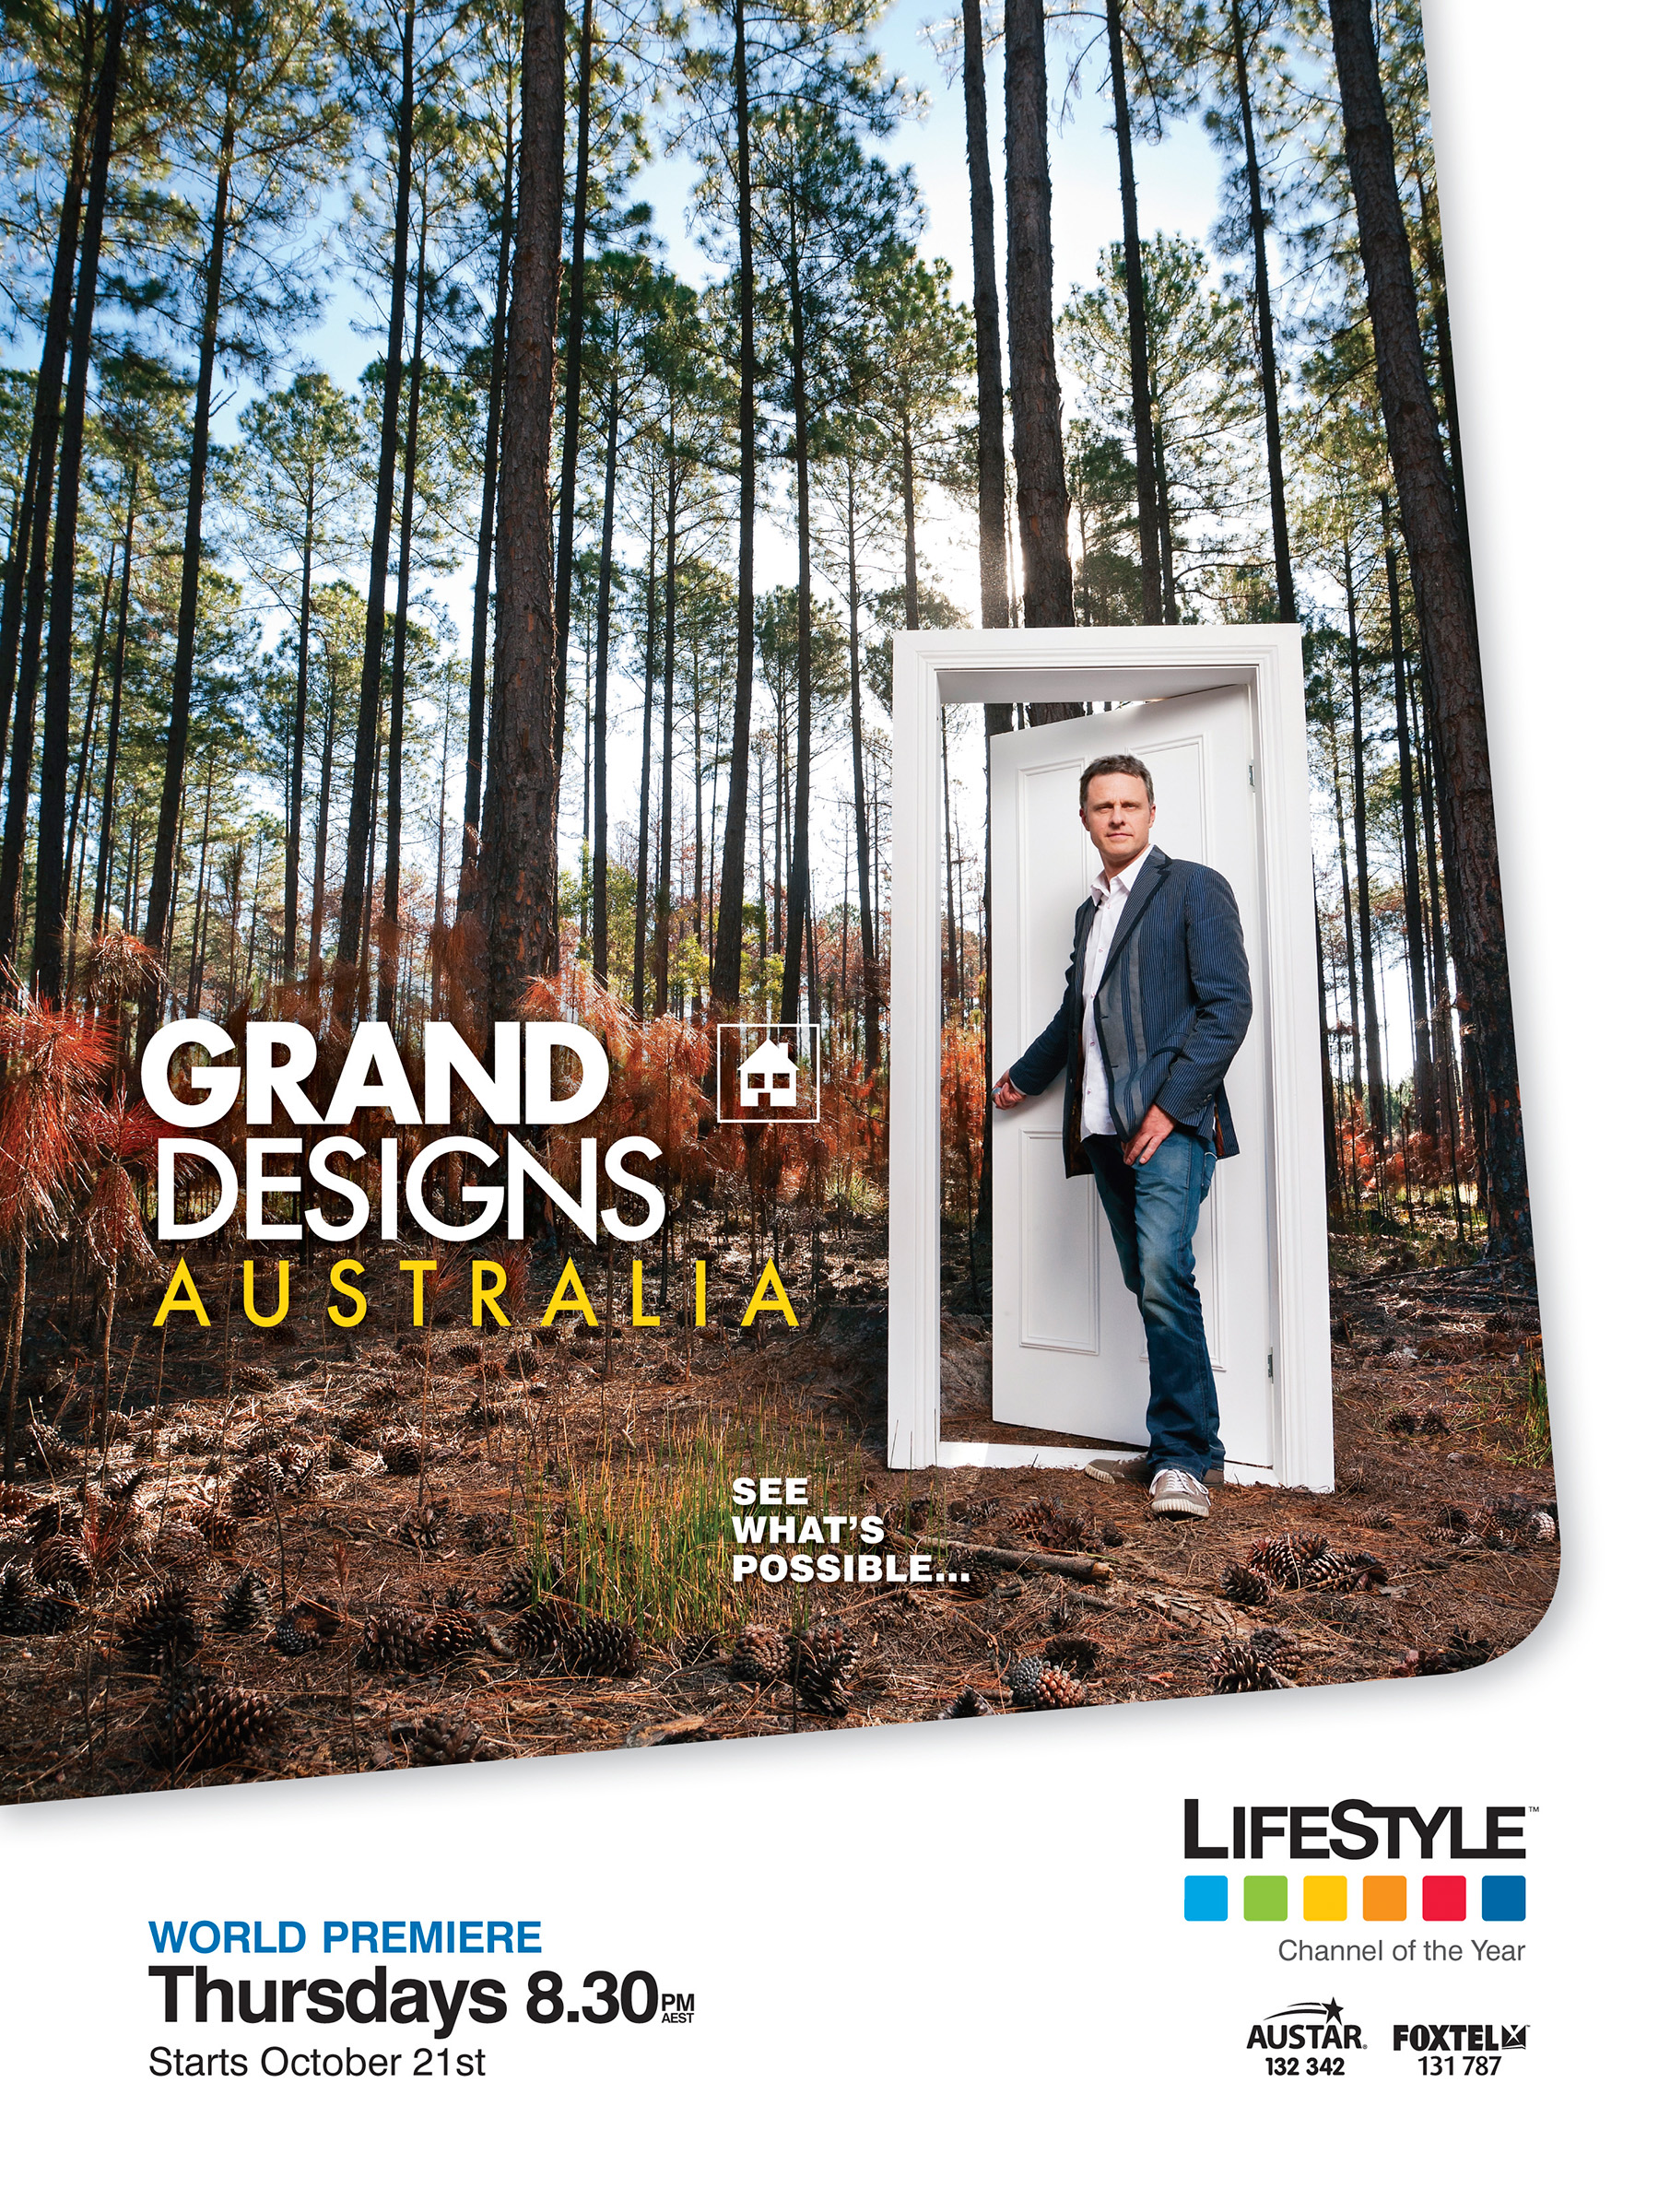 Advertising TV Series commercial photography Grand Designs Australia Peter Maddison opening white door standing in the forest